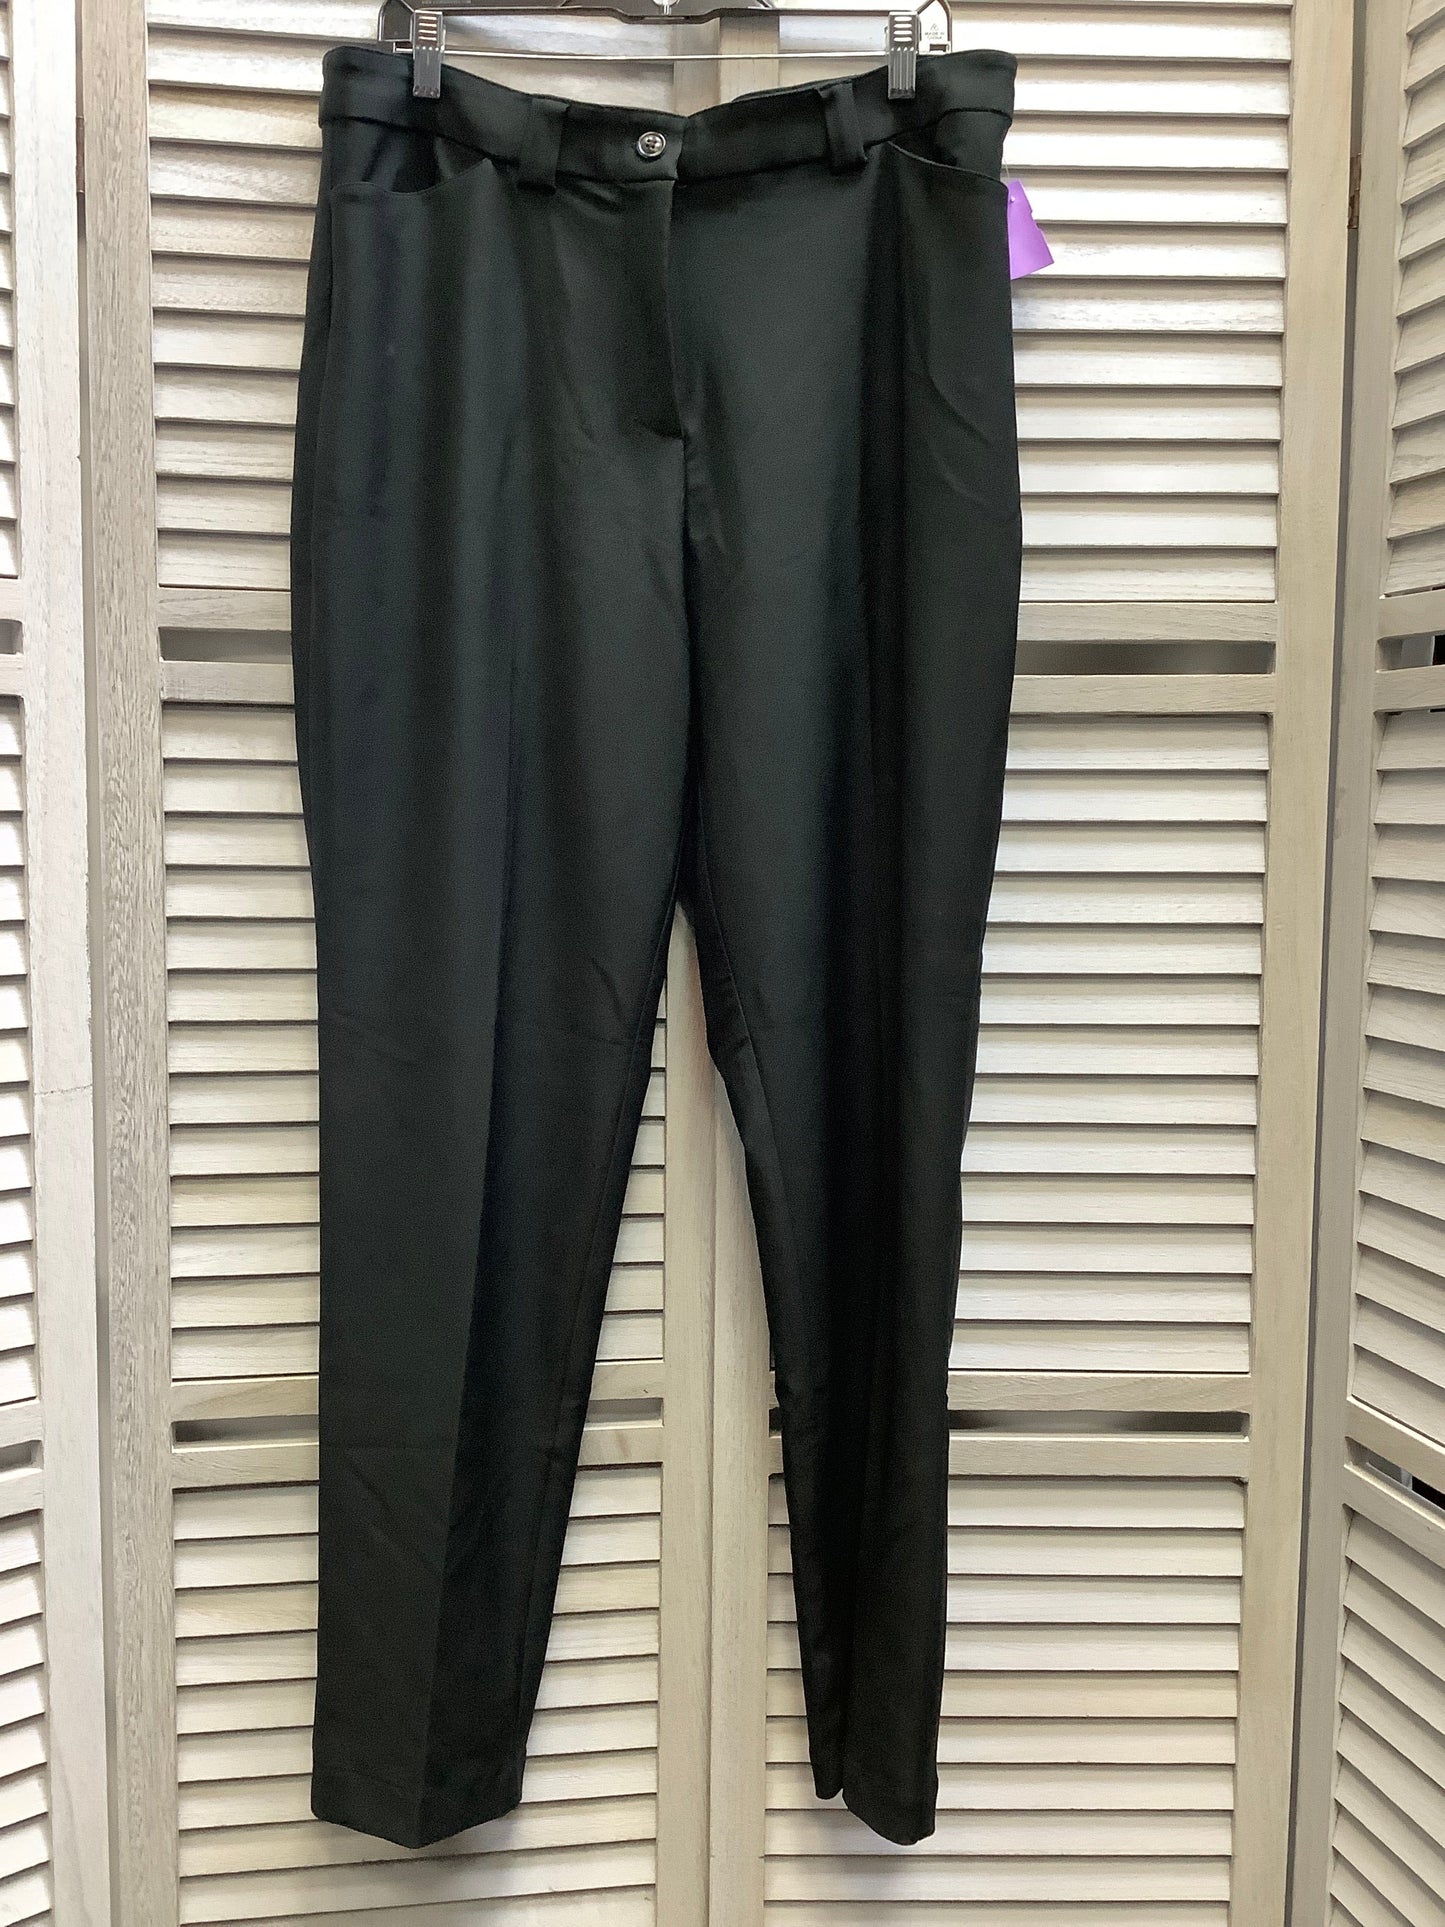 Black Pants Dress New York And Co, Size 14